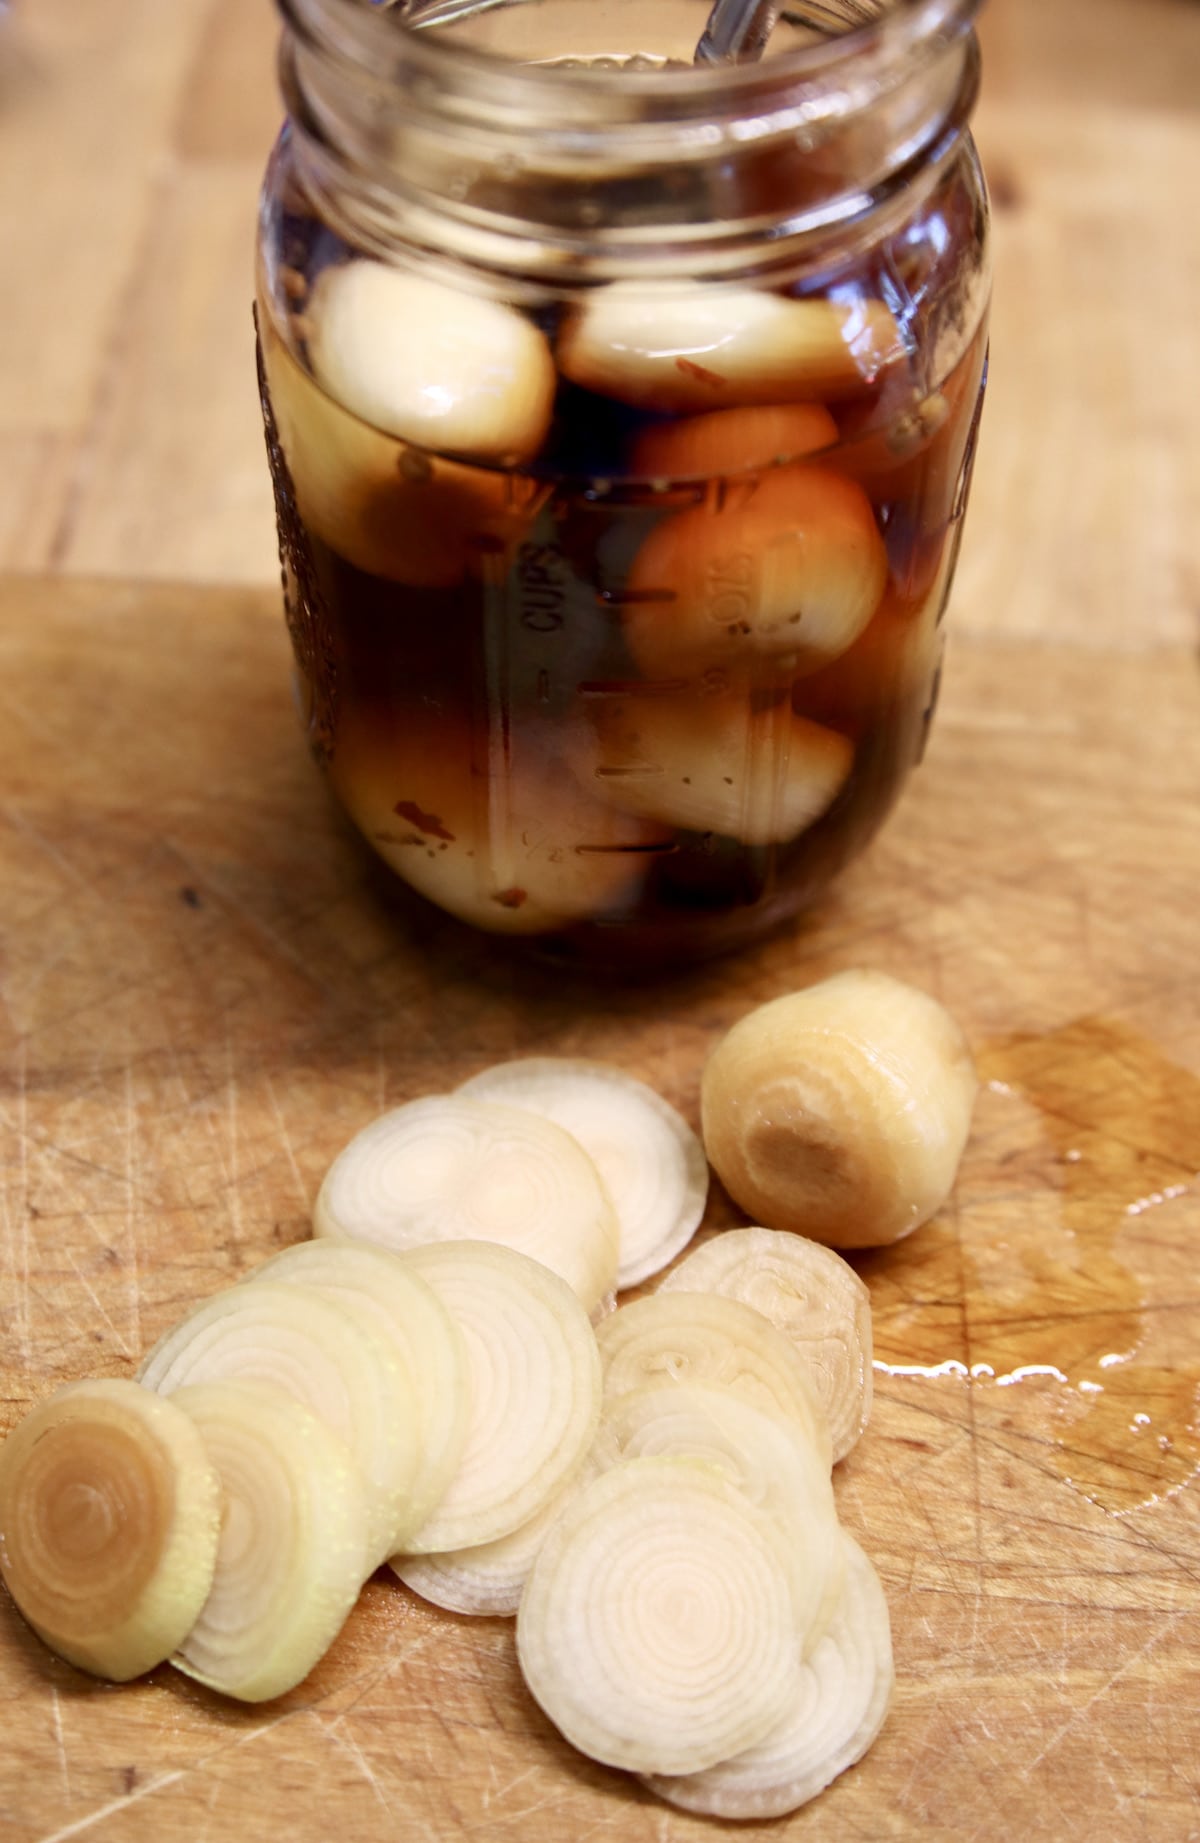 Sliced pickled onions with jar.